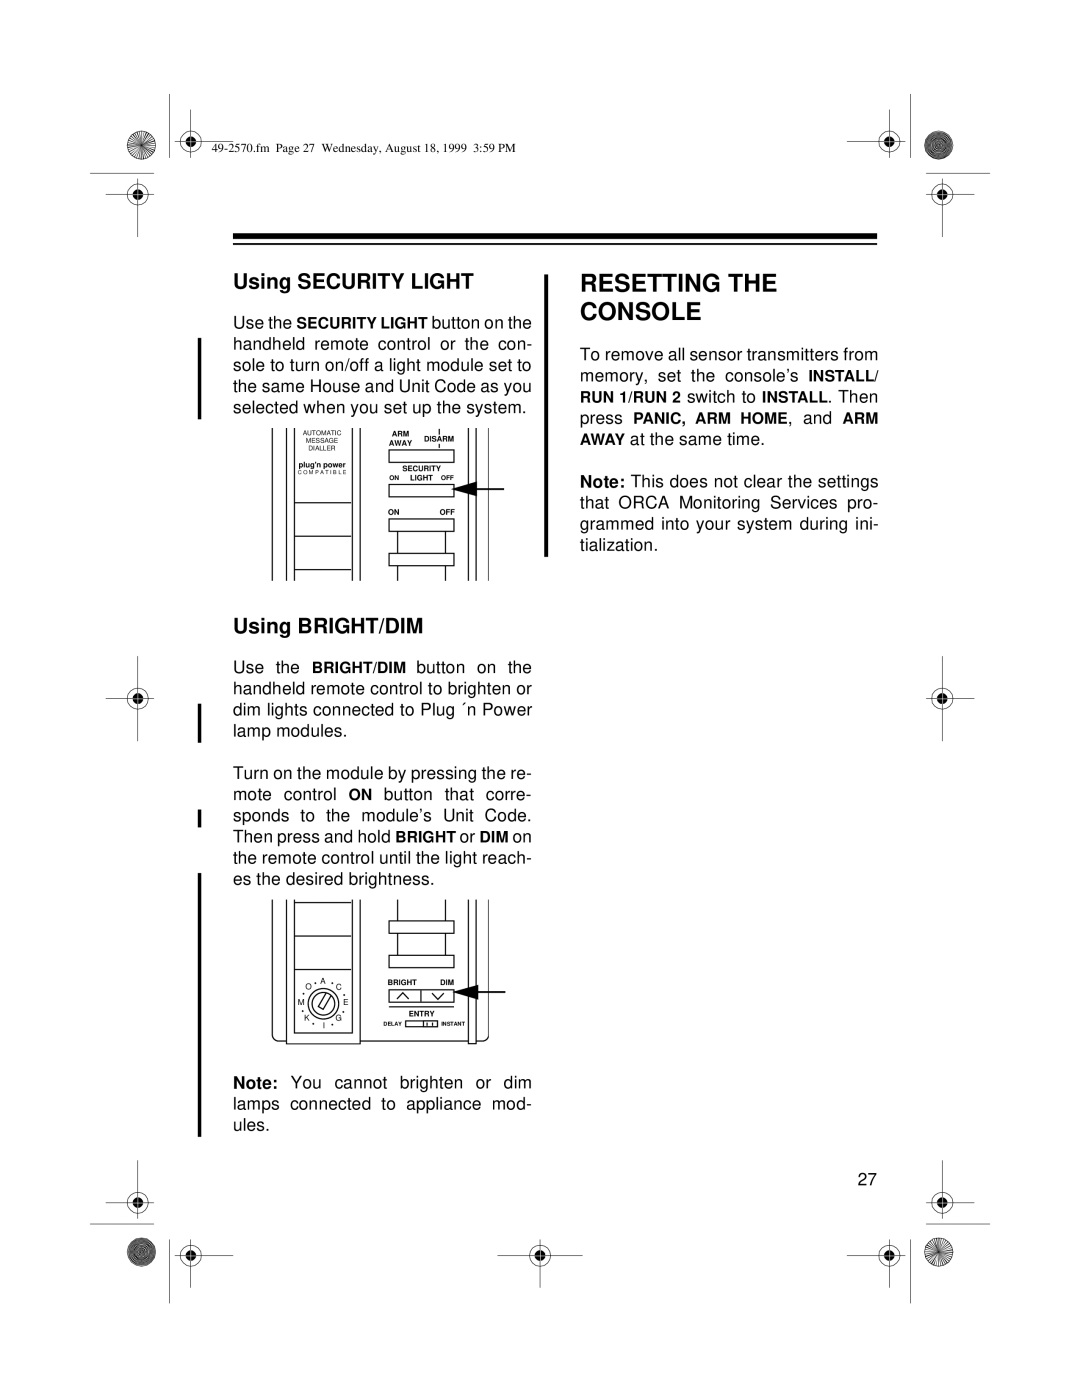 Radio Shack 49-2570 owner manual Resetting The Console, Using SECURITY LIGHT, Using BRIGHT/DIM 